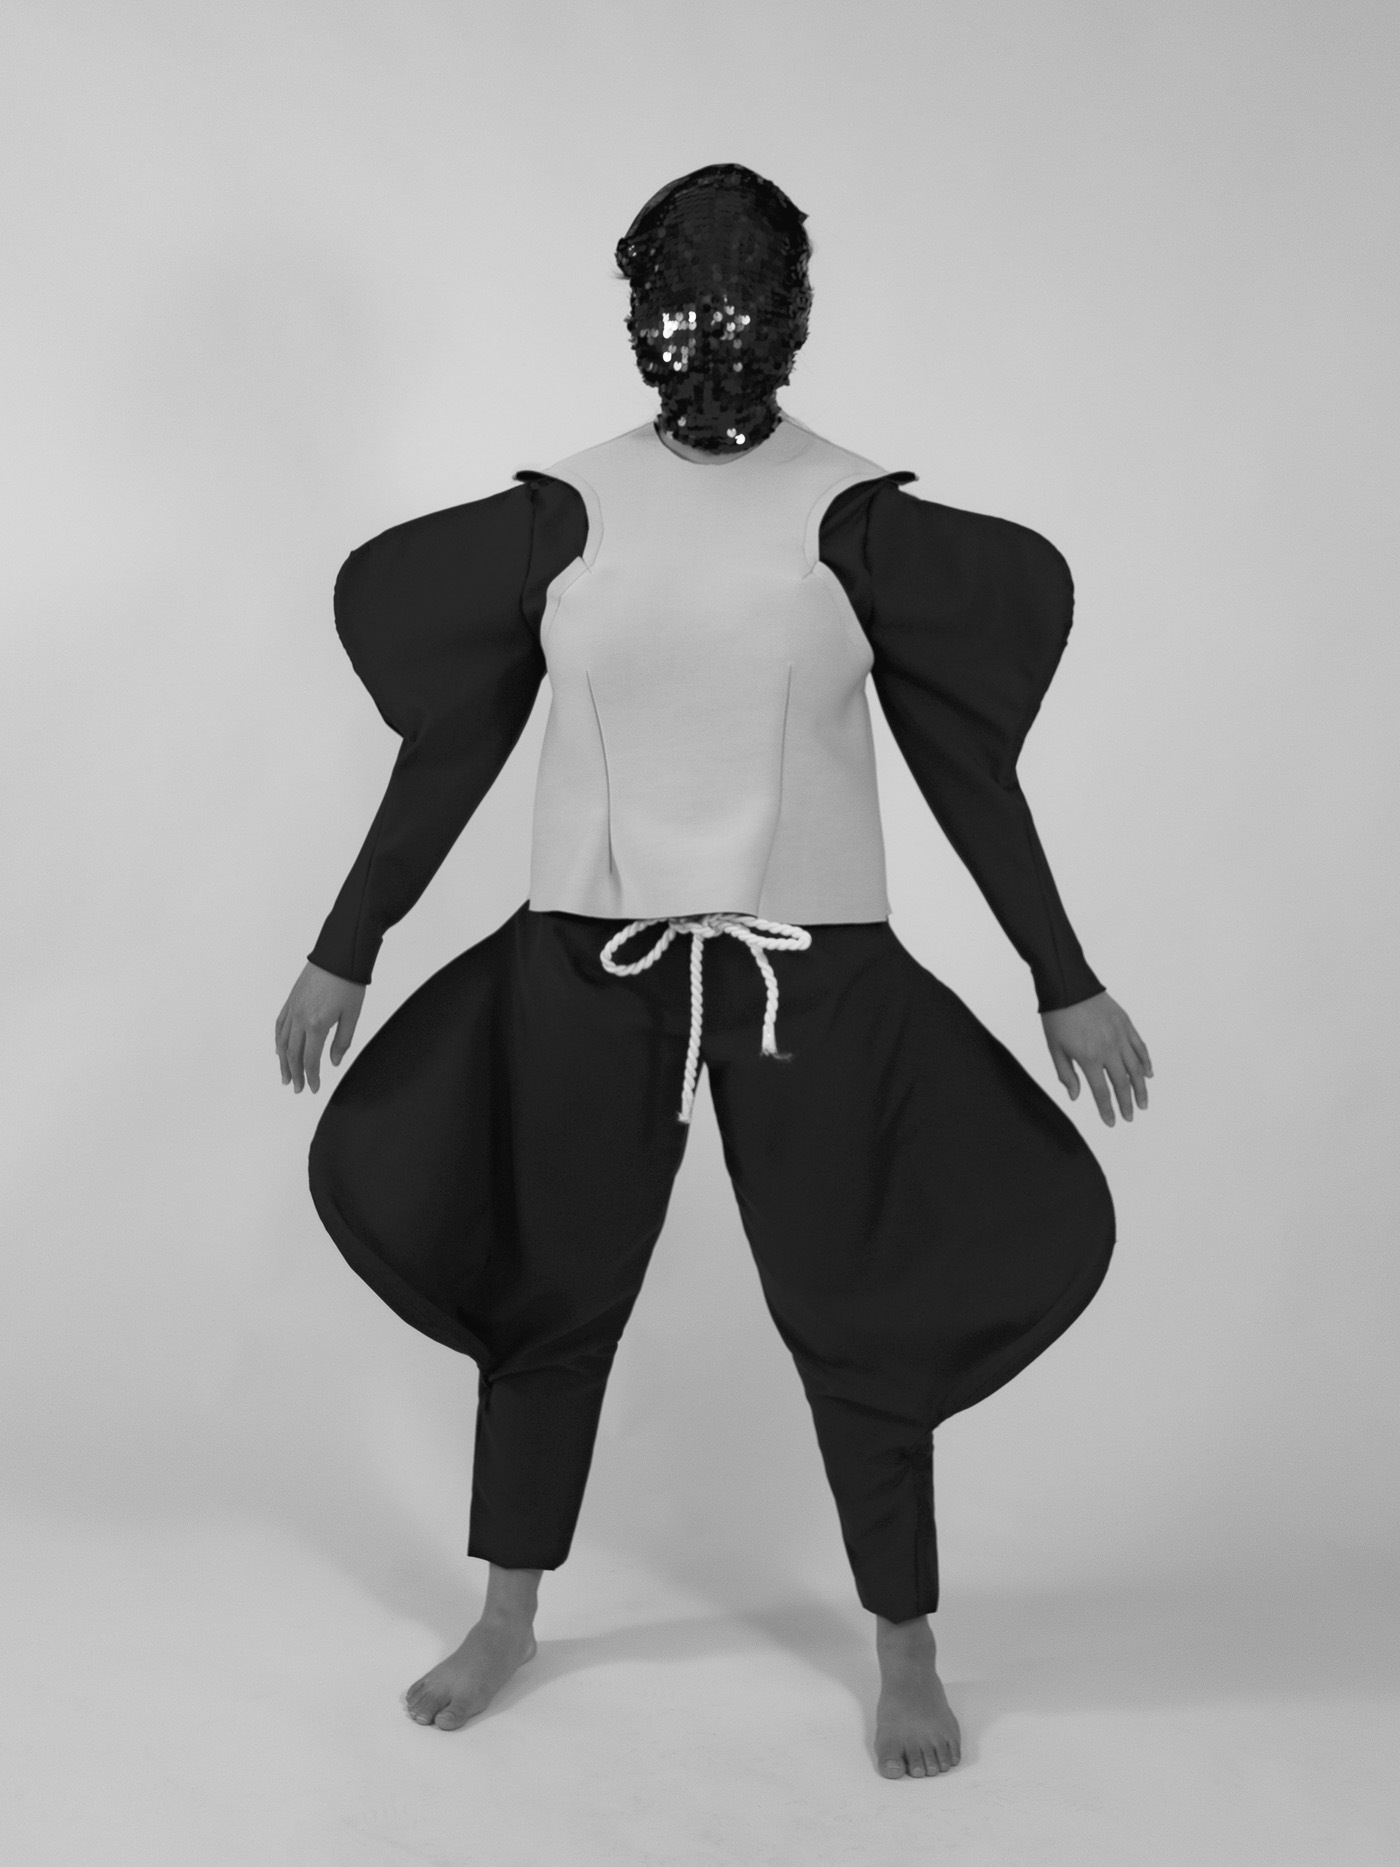 A figure wearing a sequin-covered mask wears a bodysuit with bulging shapes at the thigh and bicep area. A white rope ties the pants together.